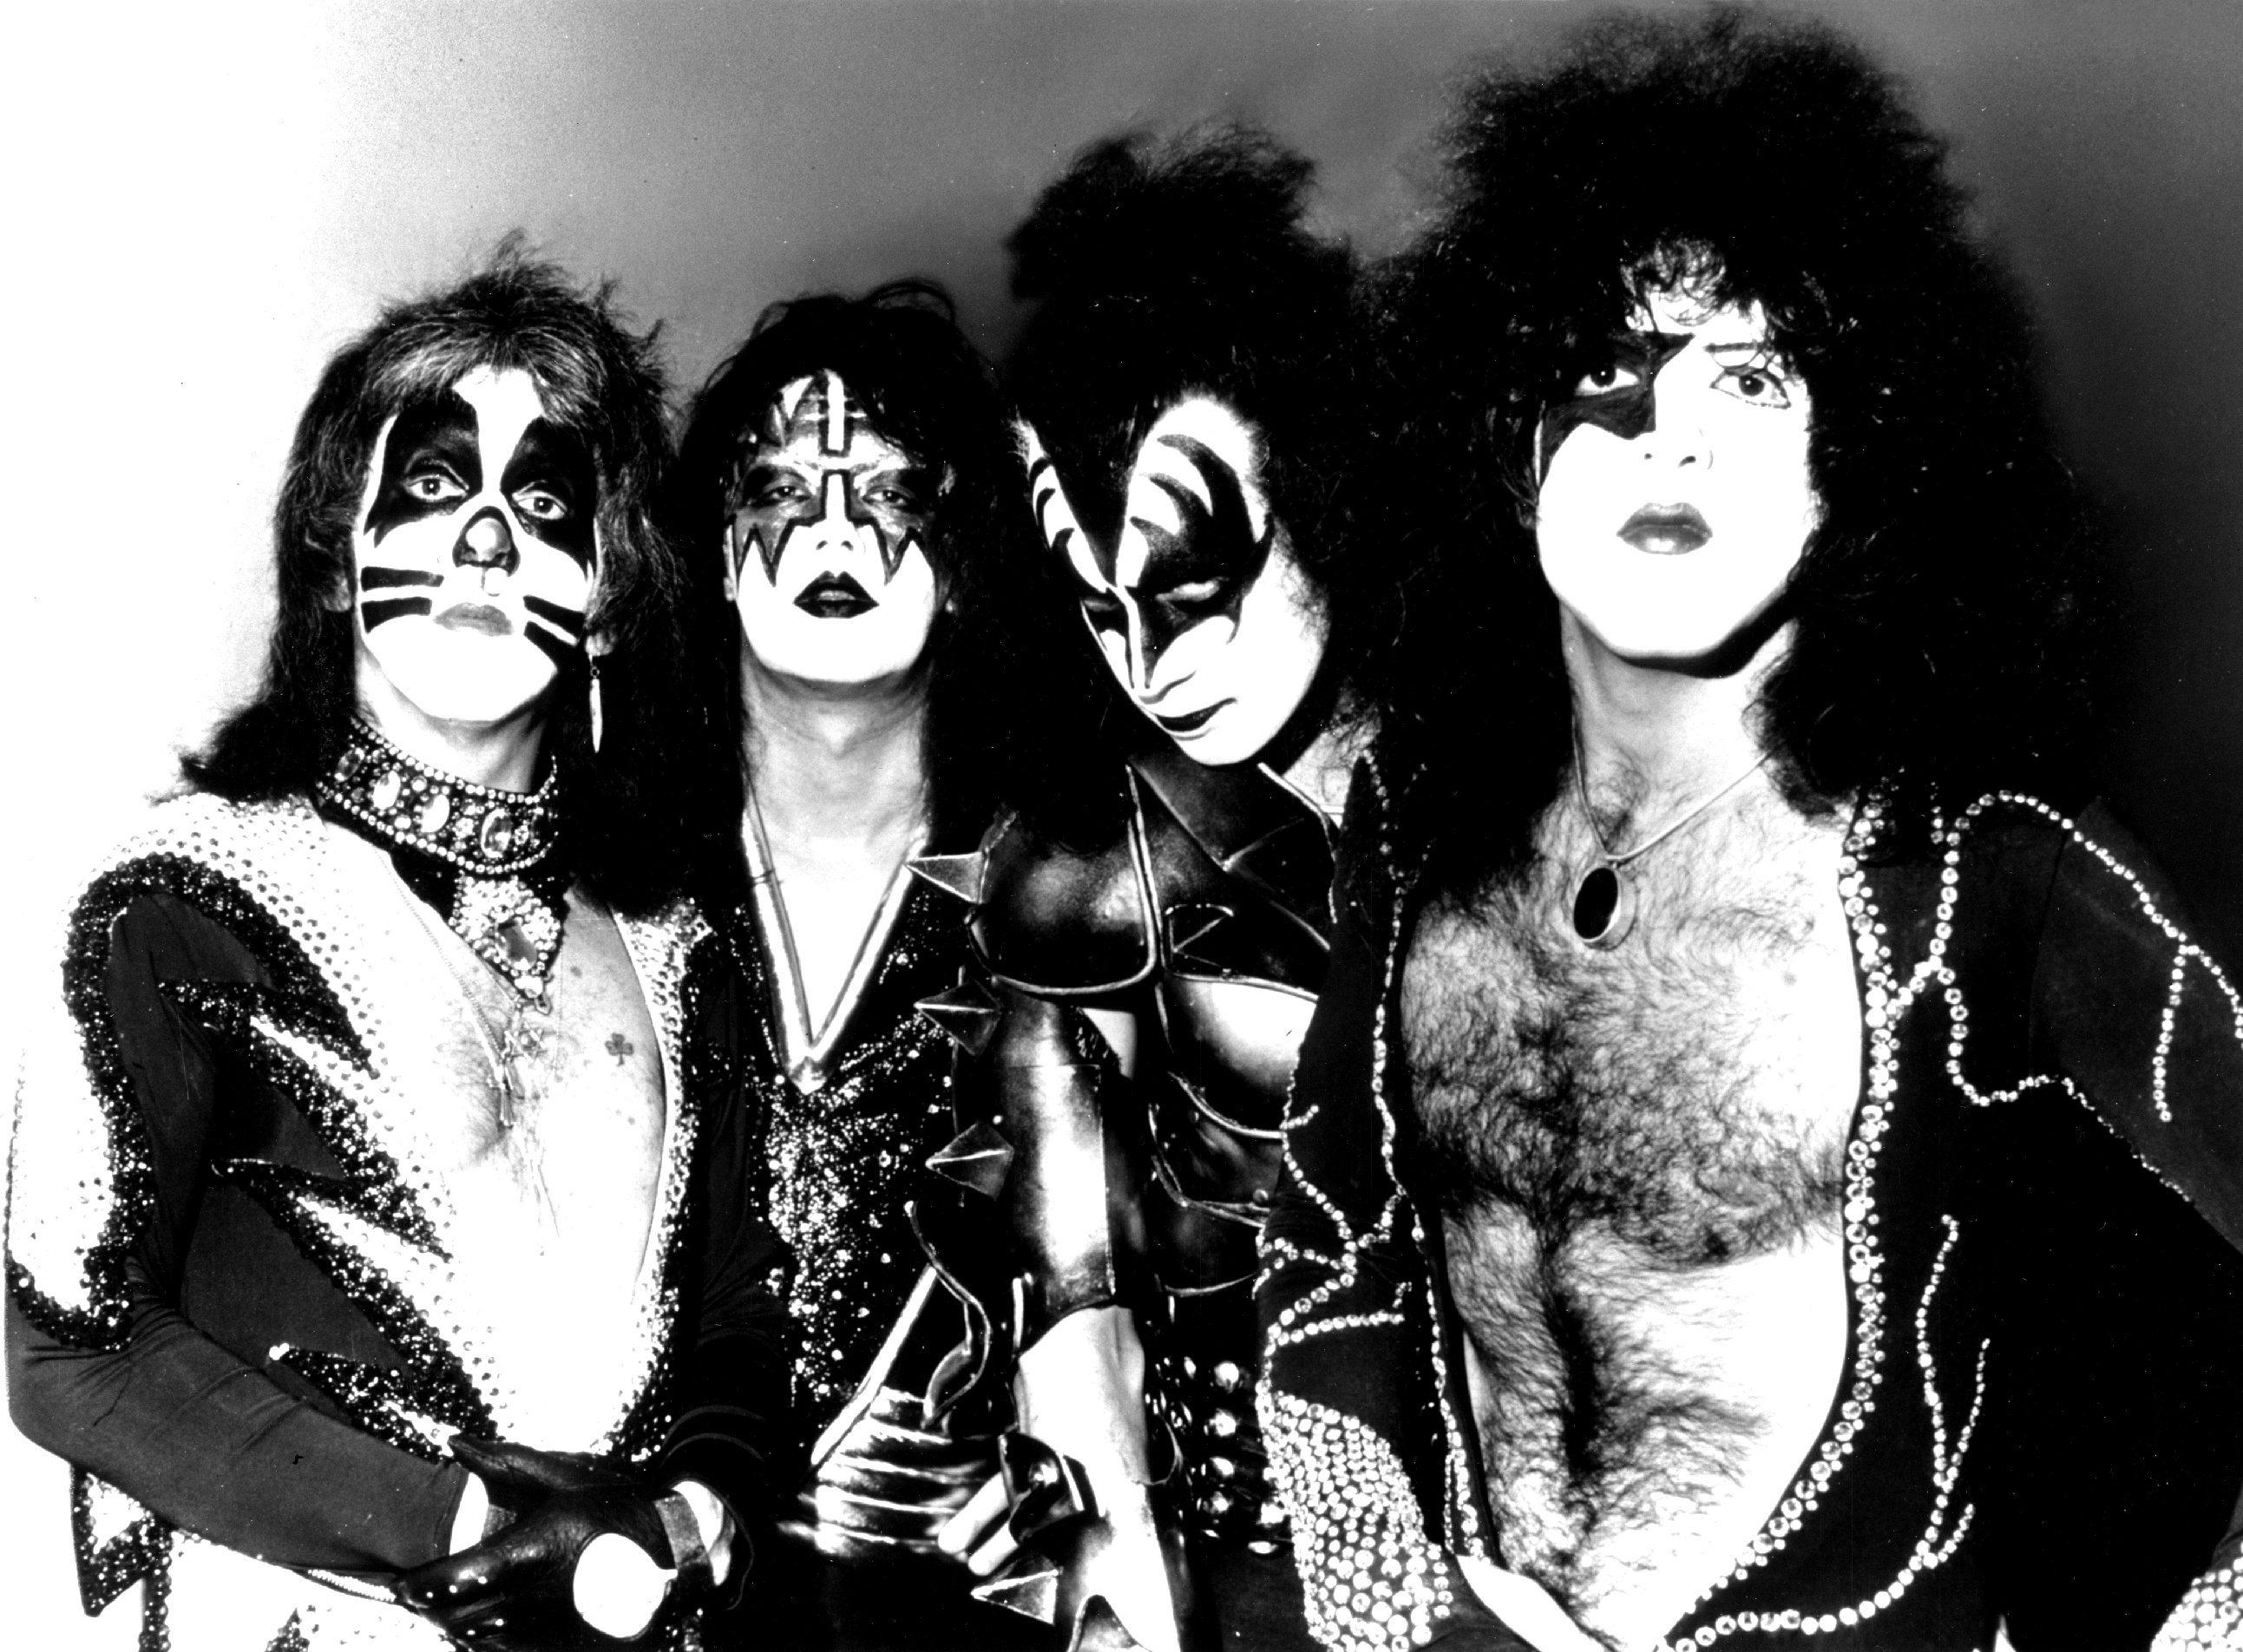 Kiss’ Ace Frehley, Peter Criss, Gene Simmons, and Paul Stanley in makeup